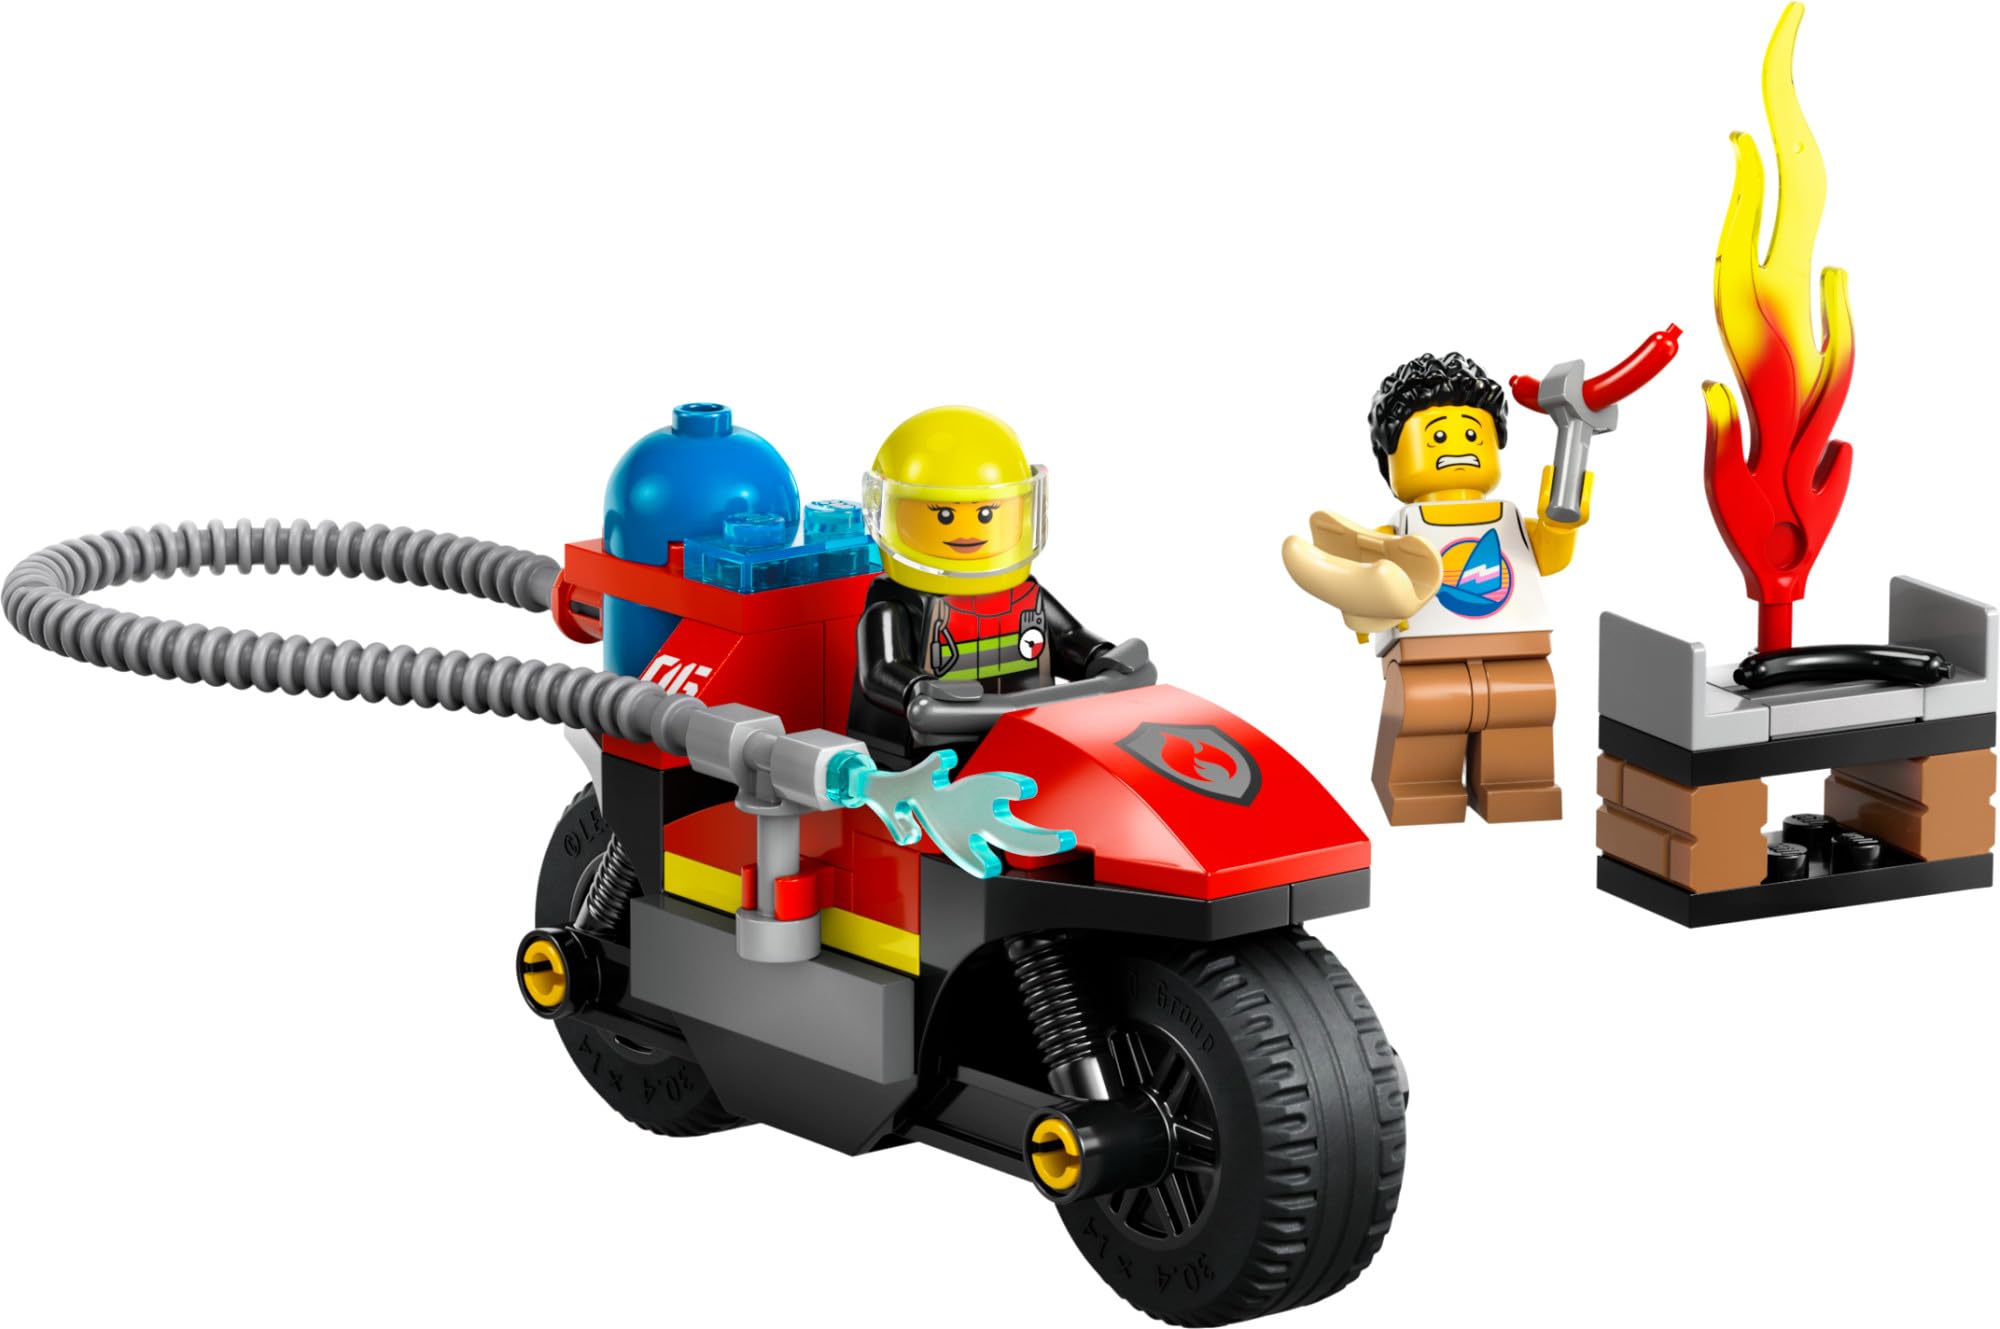 LEGO City Fire Rescue Motorcycle Firefighter Toy Playset for Kids Ages 4 and Up, Includes a Motorcycle Toy and 2 Minifigures, Fun Gift Idea or Pretend Play Toy for Boys and Girls, 60410